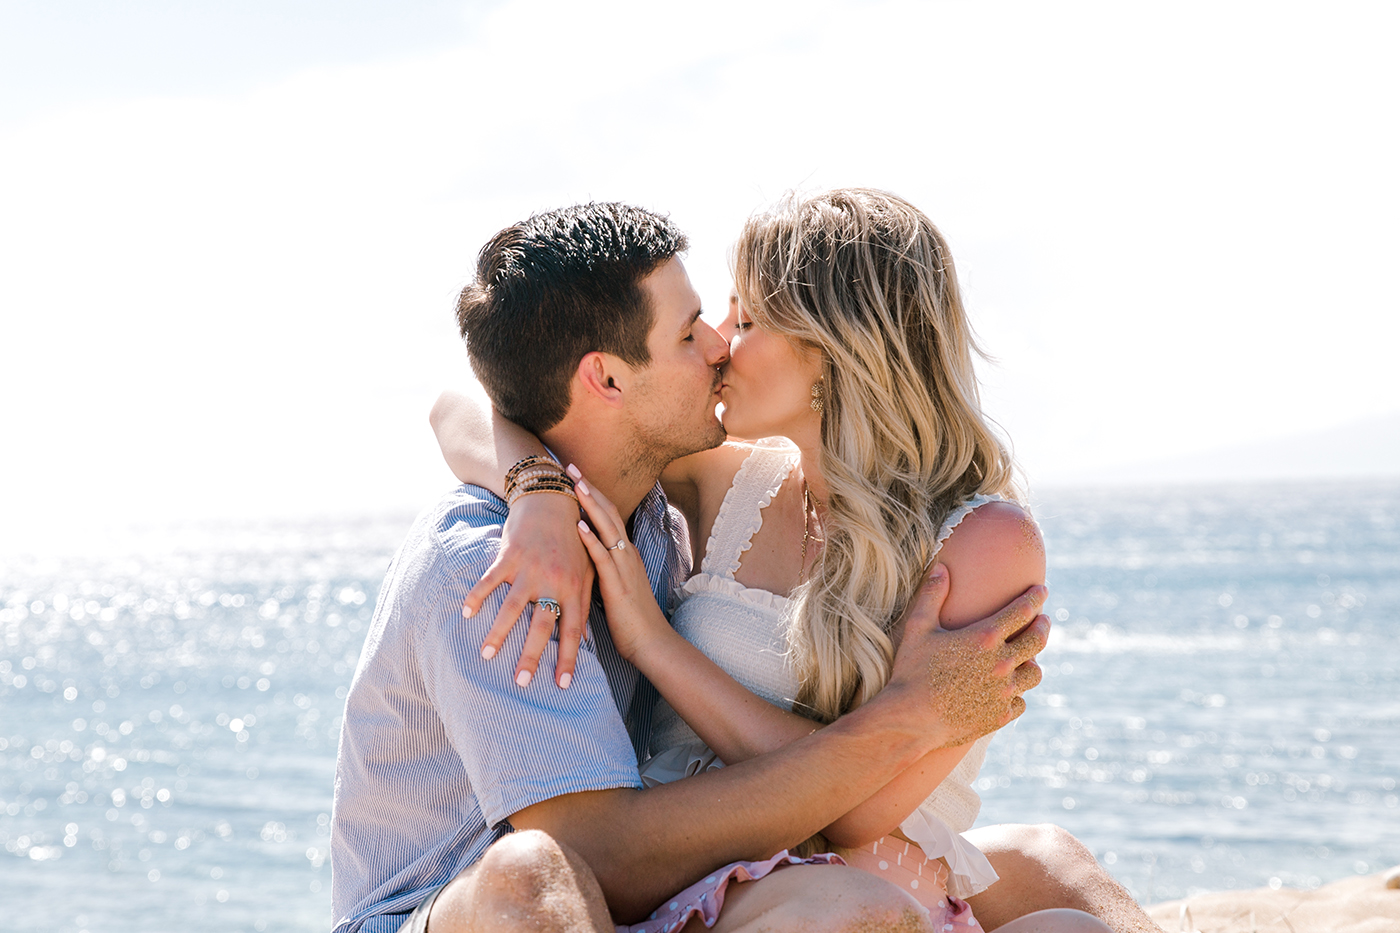 Destination Engagement Session in Maui | Laylee Emadi Photography